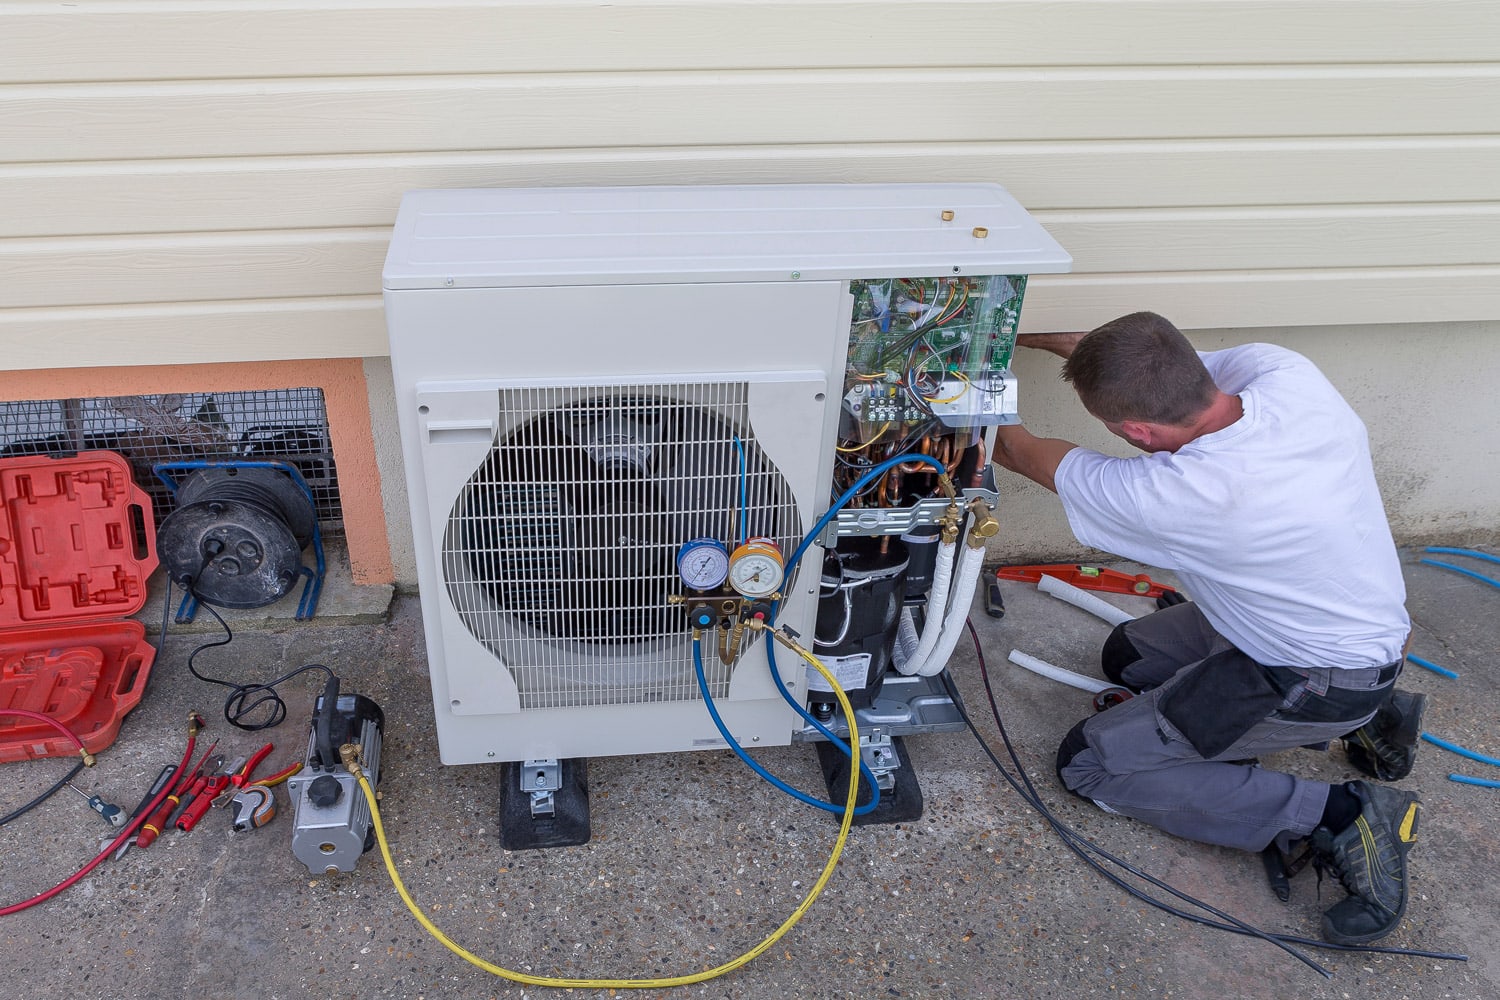 Maintenance or troubleshoot for heat pump issues